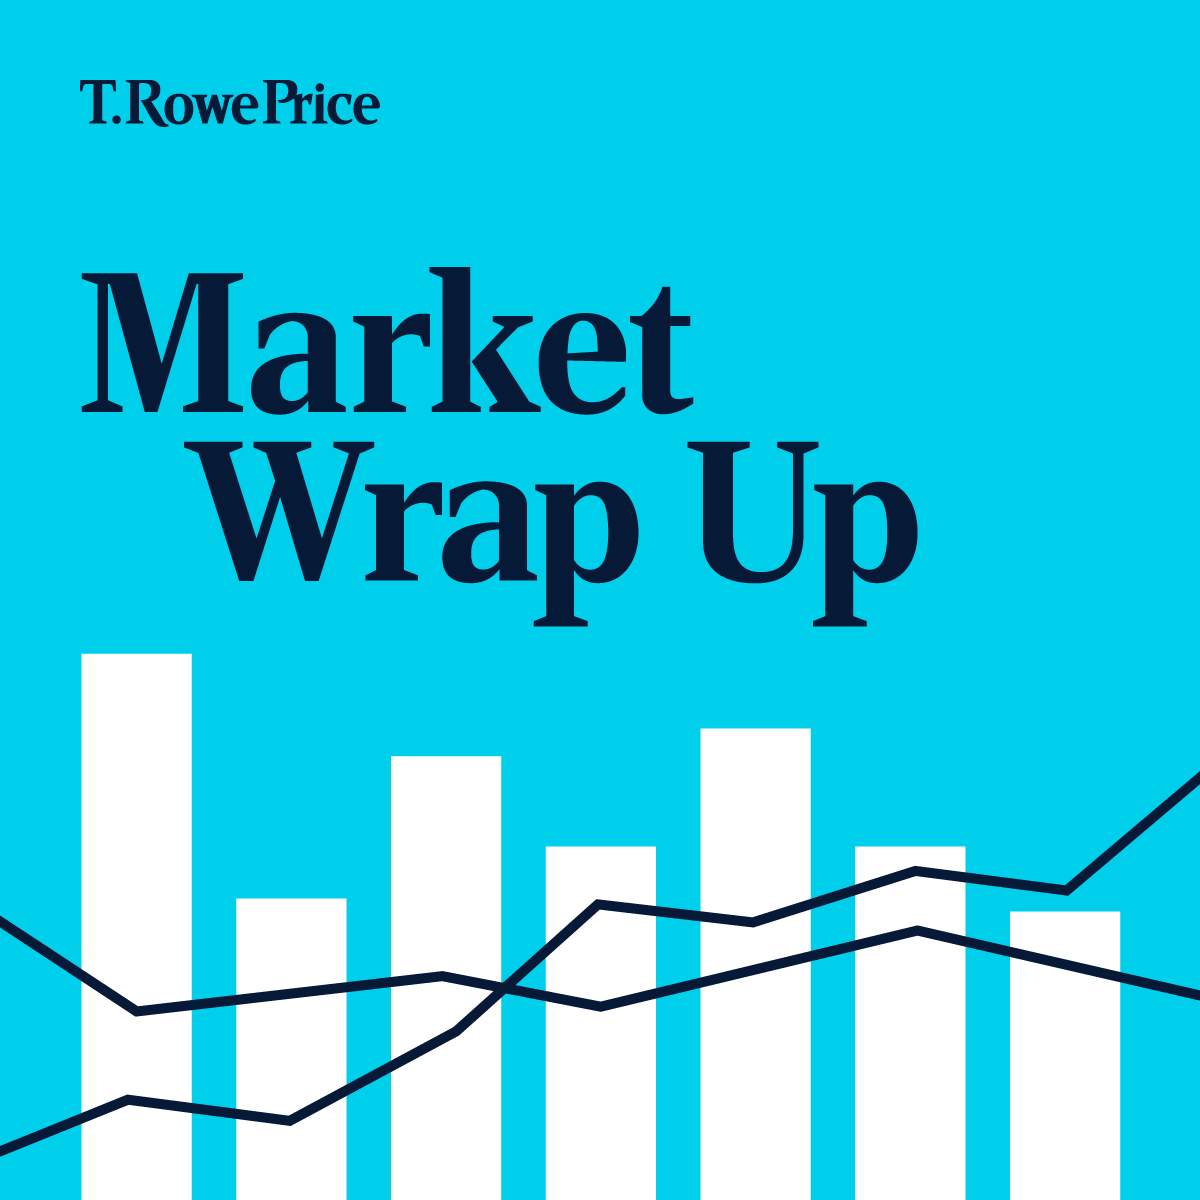 Looking for a quick way to get up to speed on global markets in the last week? Read our Market Wrap Up. trowe.com/497I7pt